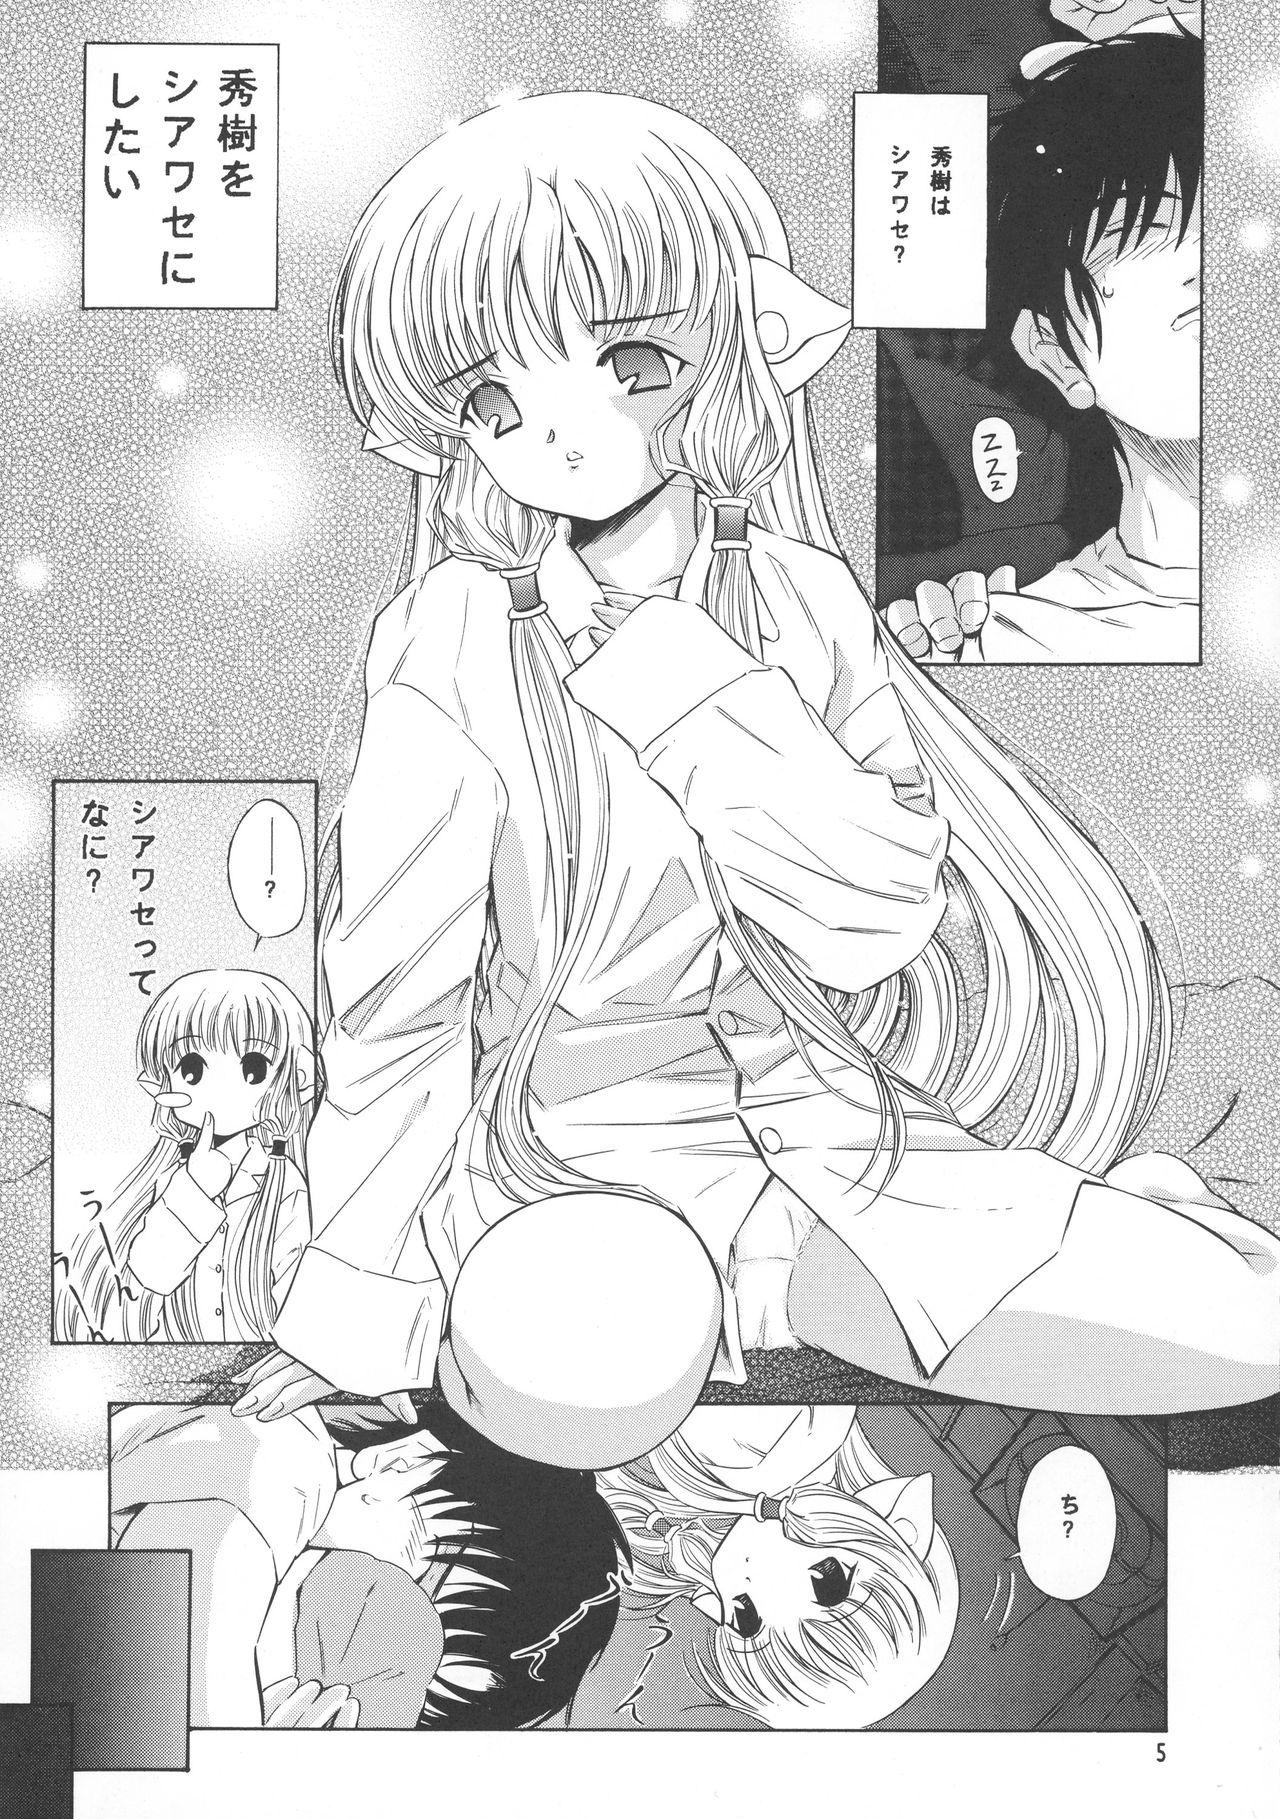 Livesex Tricolor - Cardcaptor sakura Chobits Angelic layer Babes - Page 5